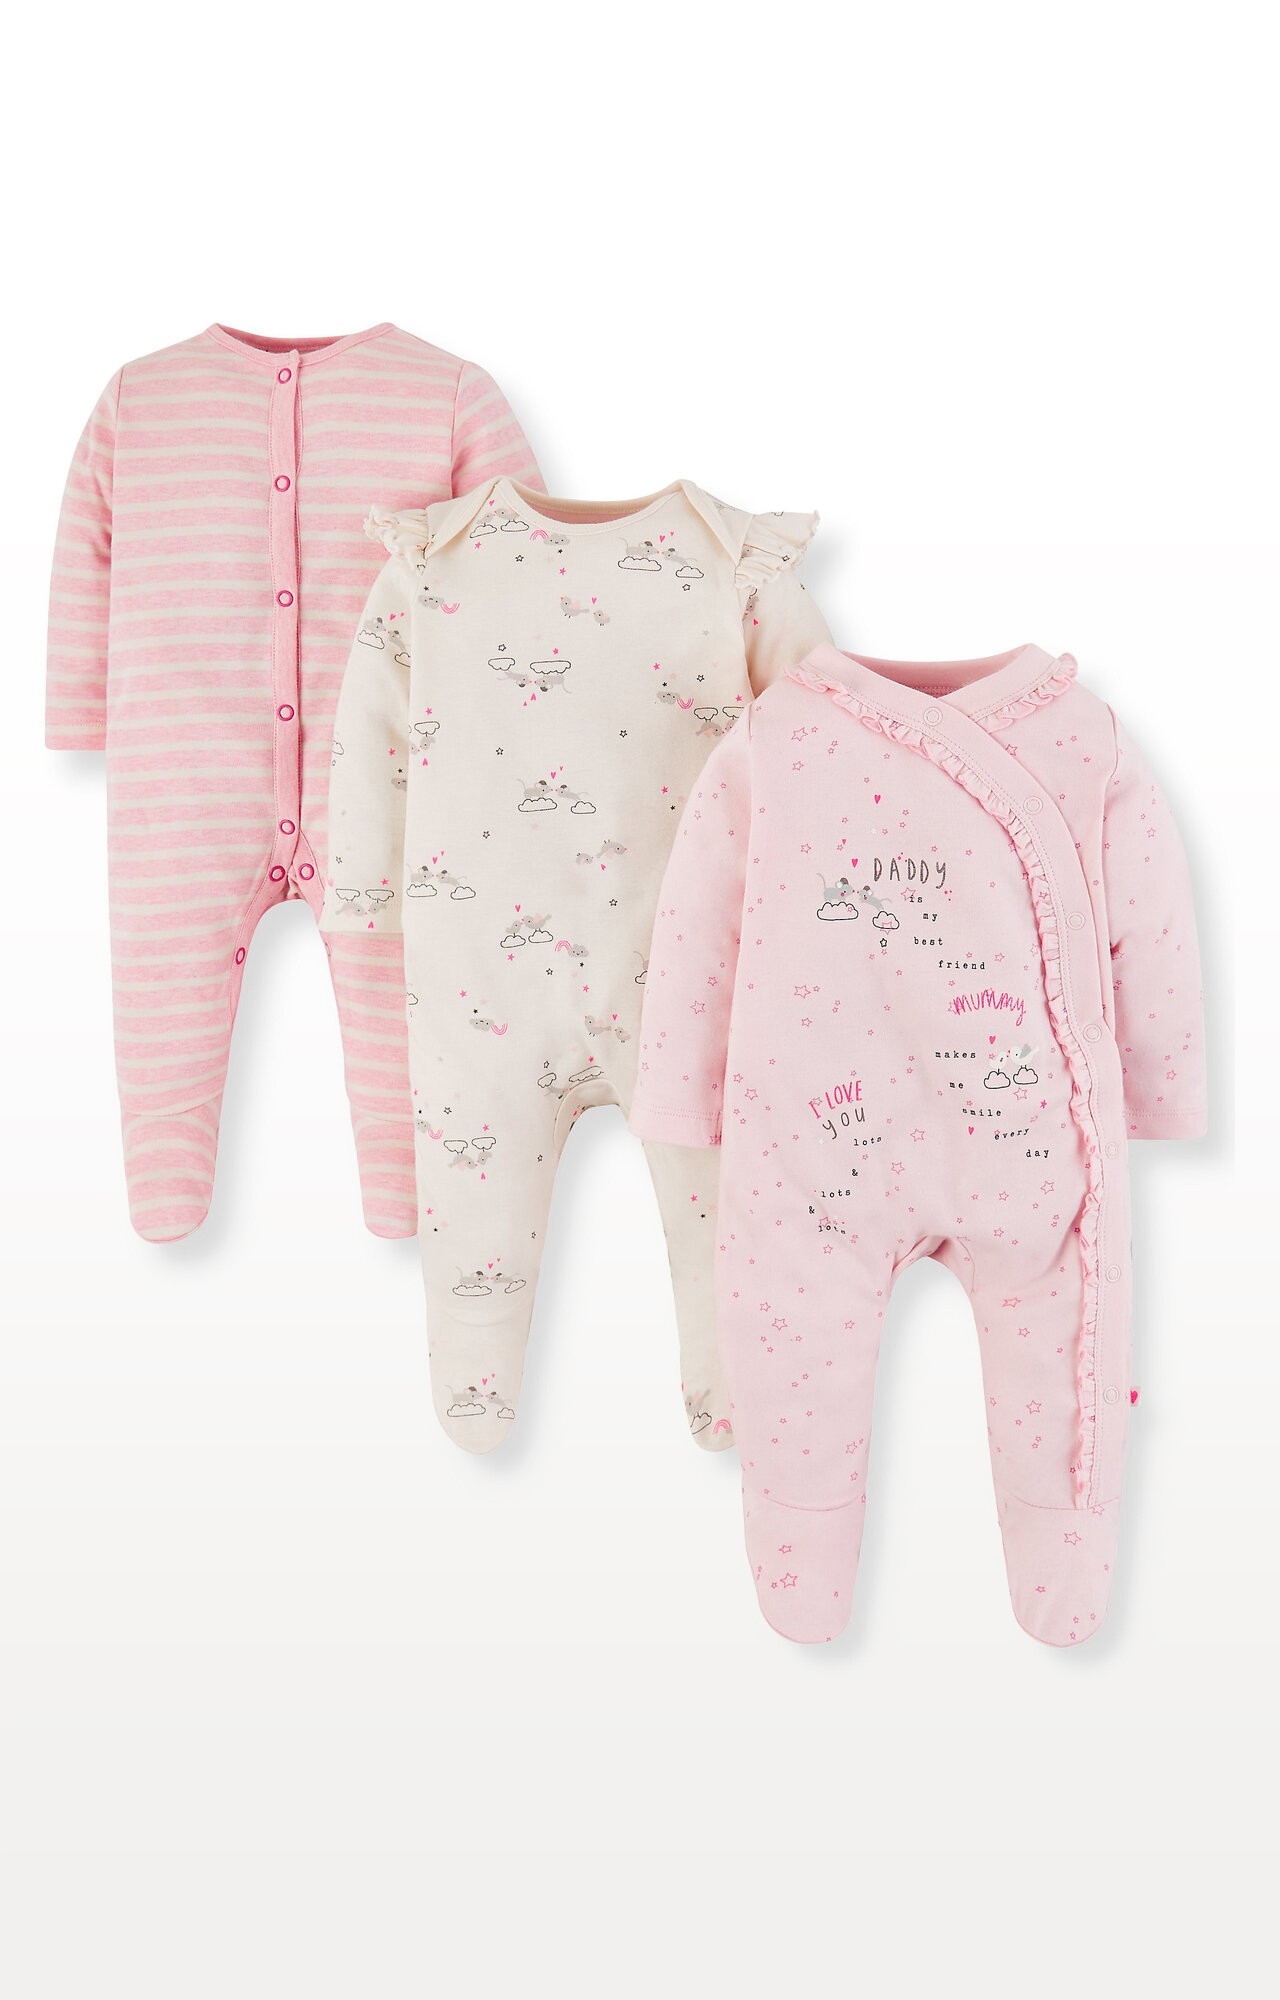 Mothercare | Mummy and Daddy Sleepsuits - Pack of 3 0